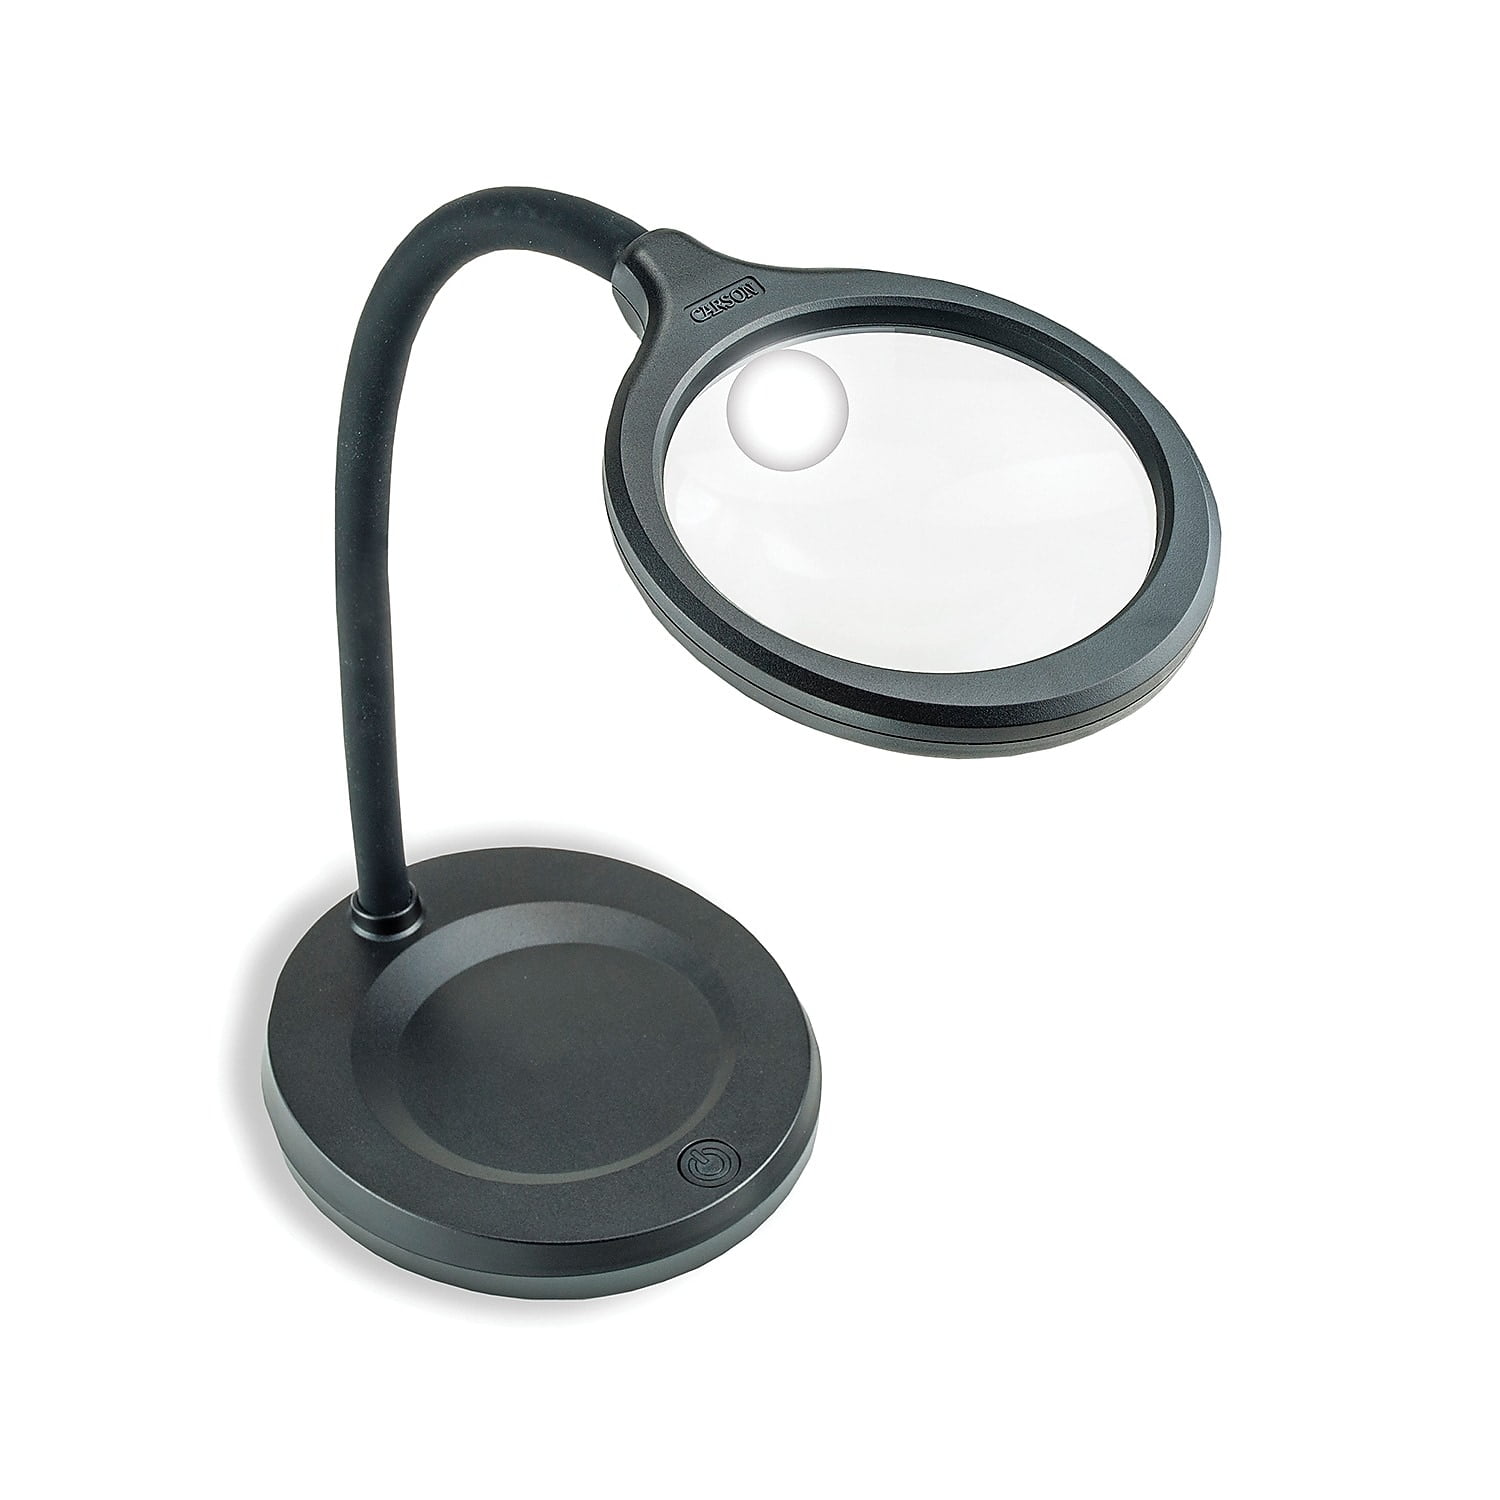 Carson MagniShine LED Lighted Hands-Free Magnifier- - 750668006776